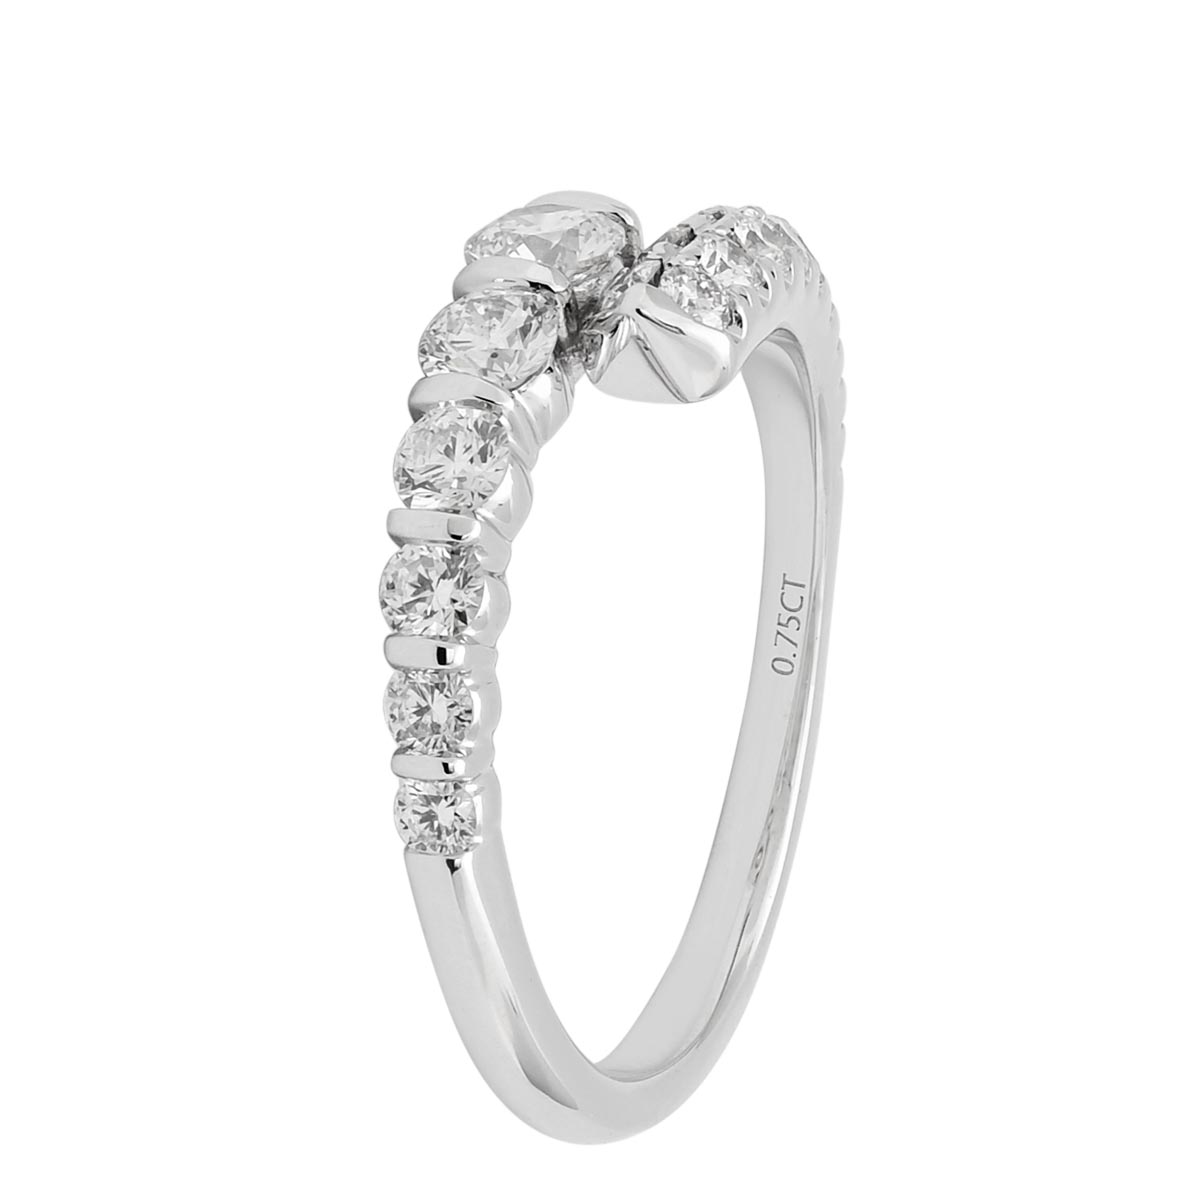 Northern Star Diamond Fashion Ring in 14kt White Gold (3/4ct tw)